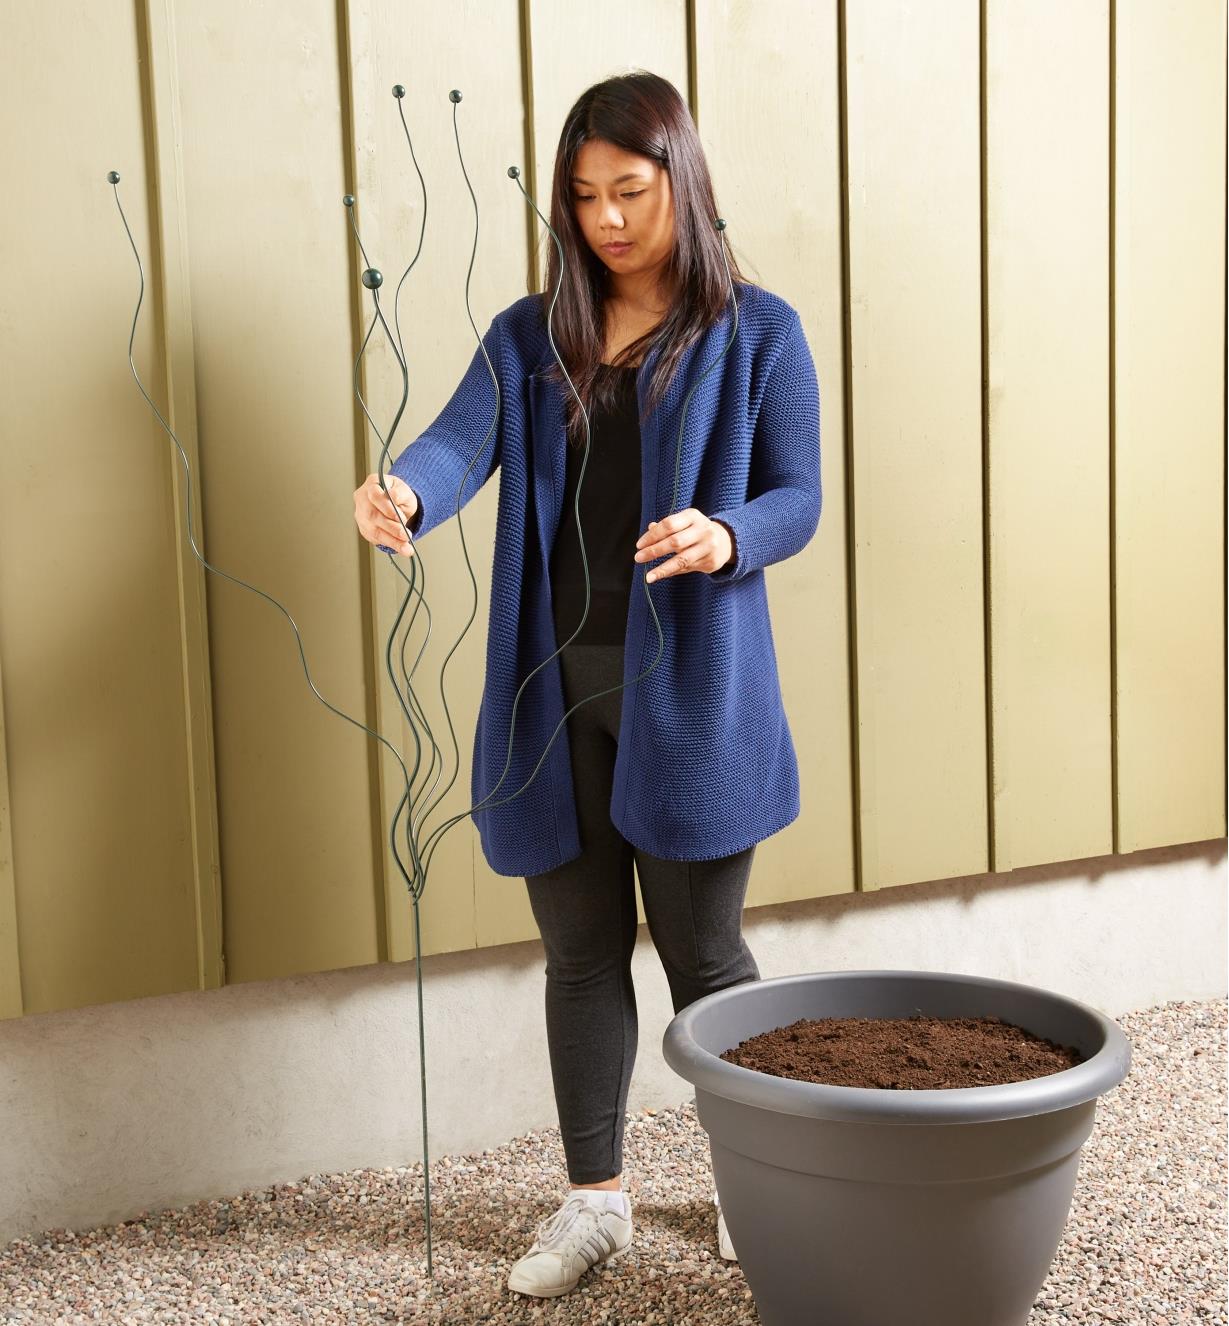 A woman holds the flexible garden stake upright to show scale